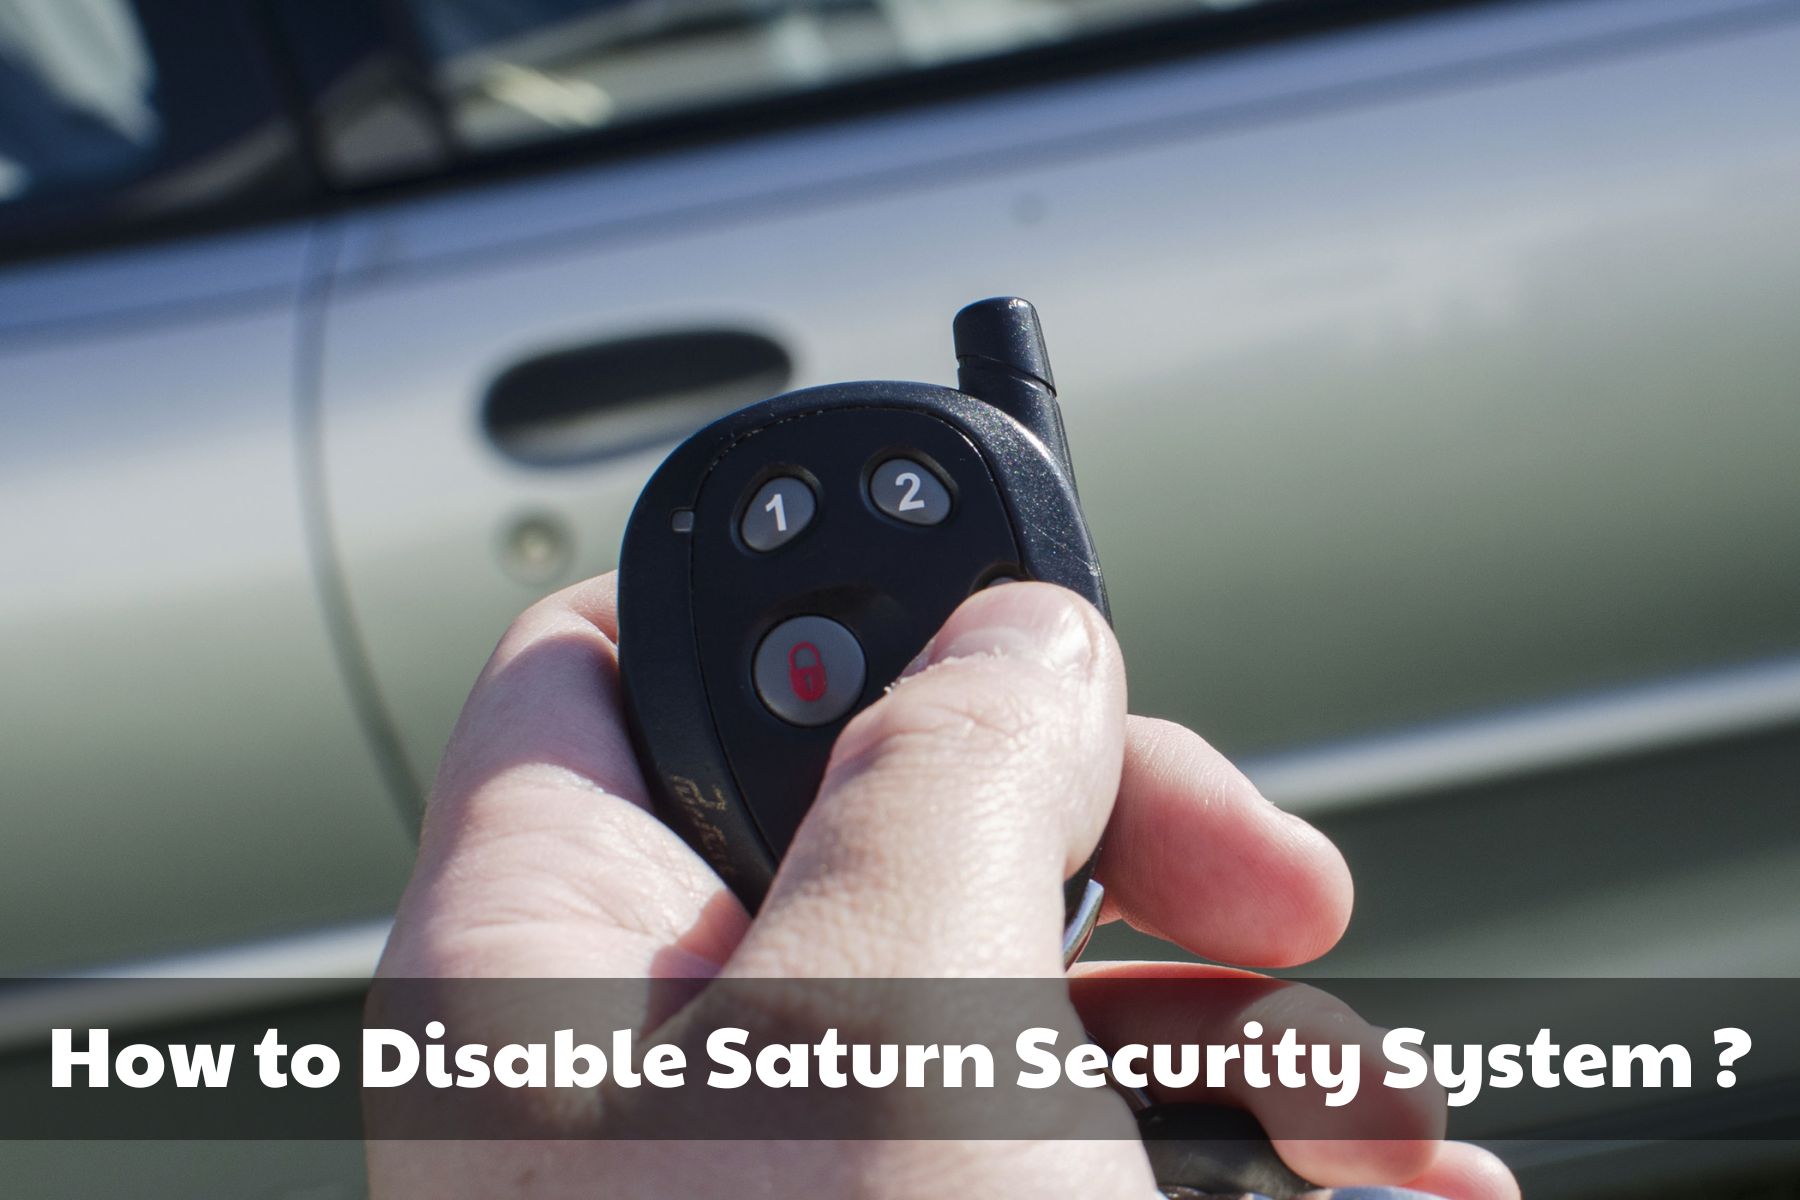 How to Disable Saturn Security System